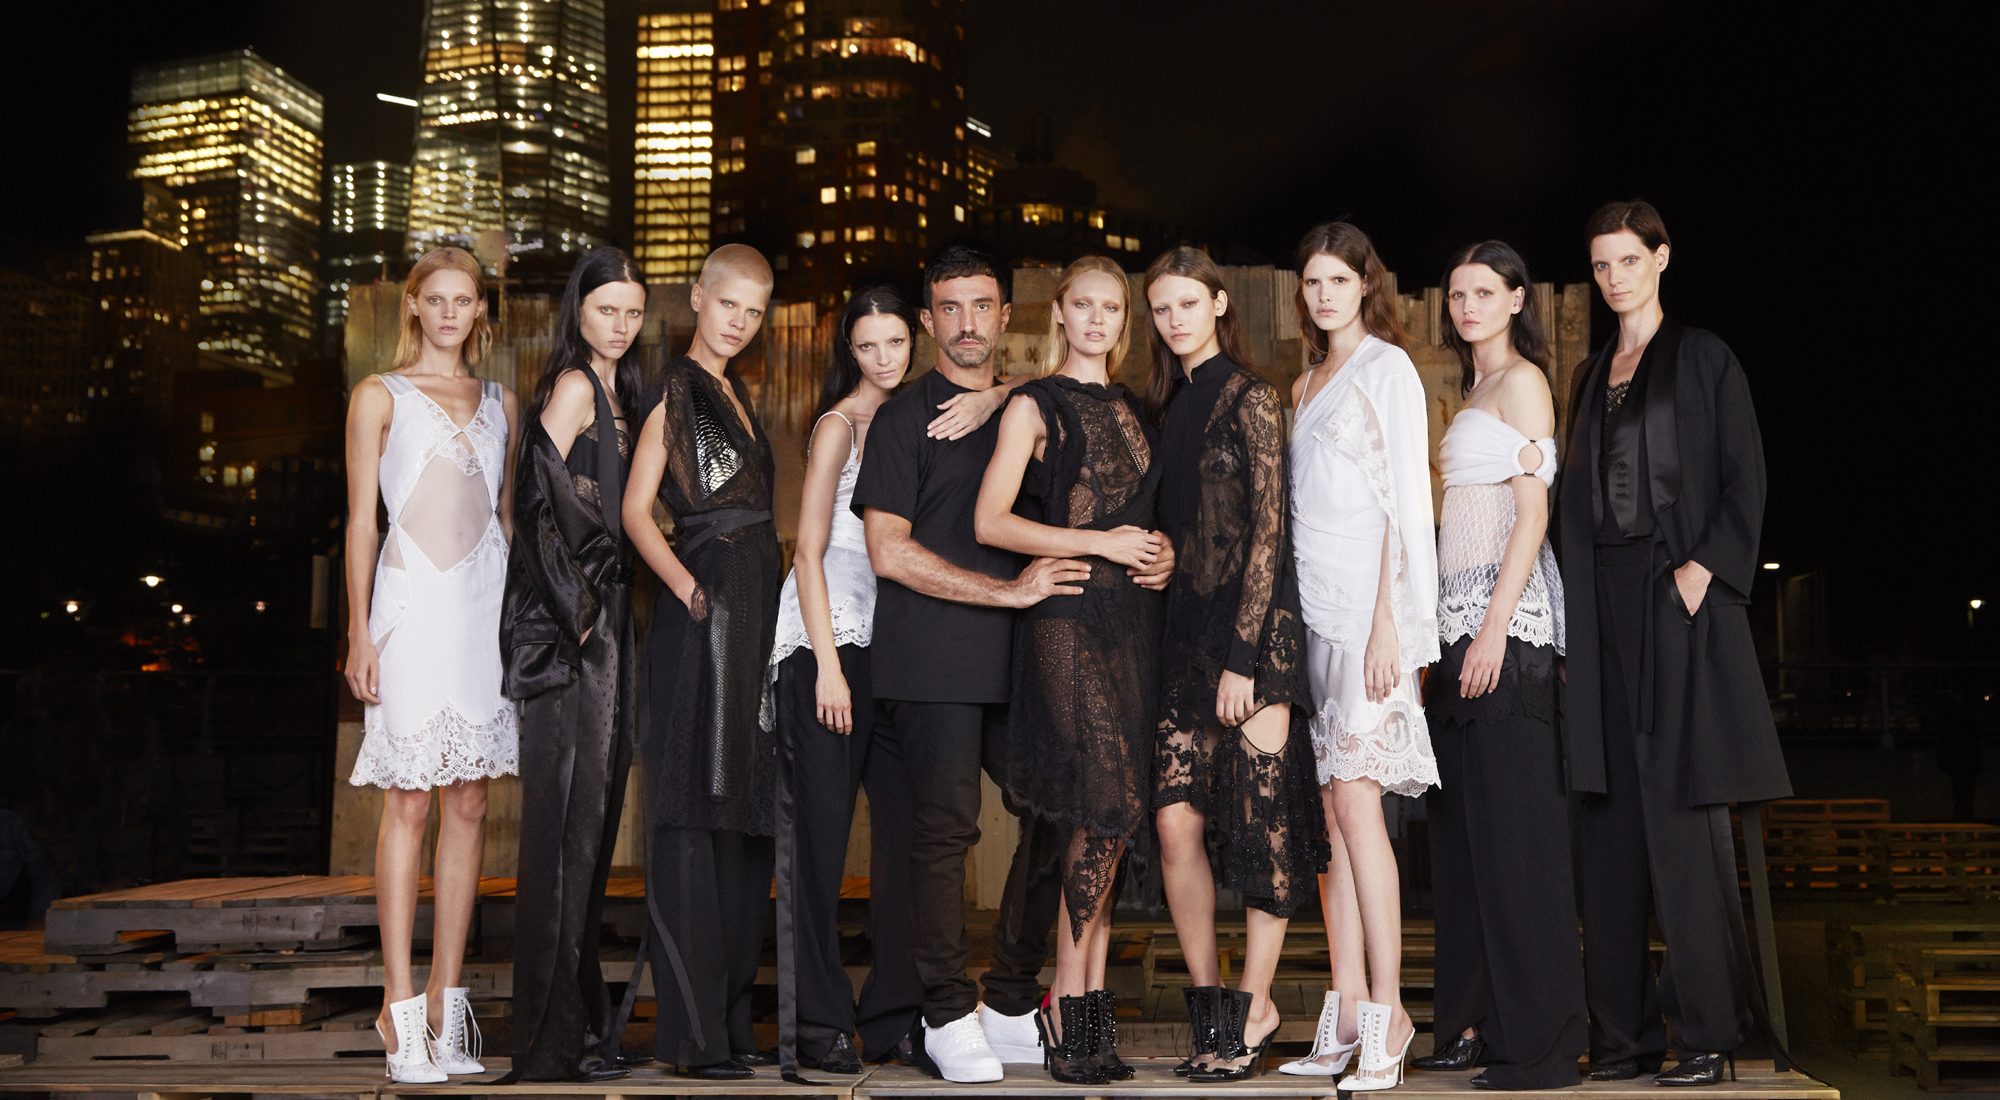 Givenchy celebrates 10 years of collaboration in New York - LVMH